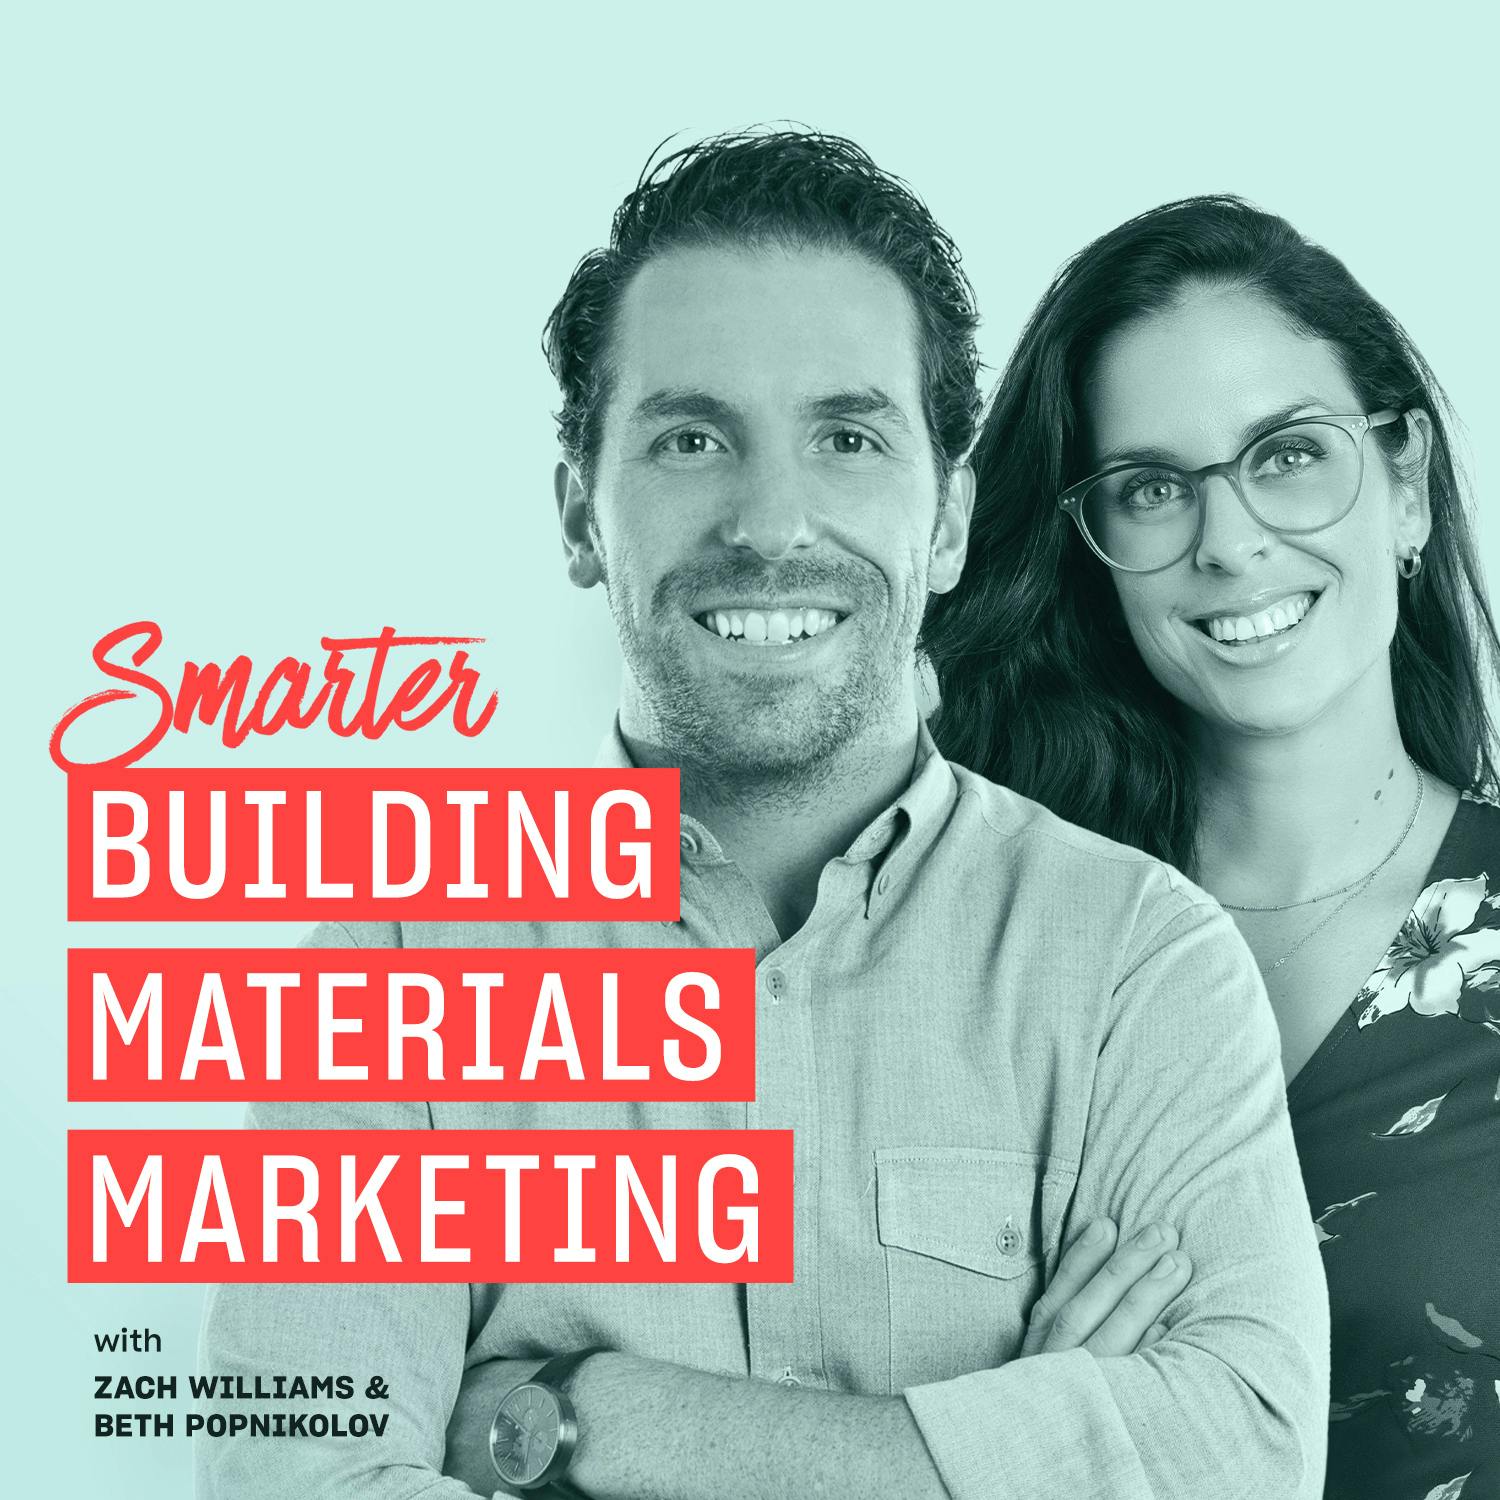 Google Analytics 4: What Building Materials Marketers Need to Know